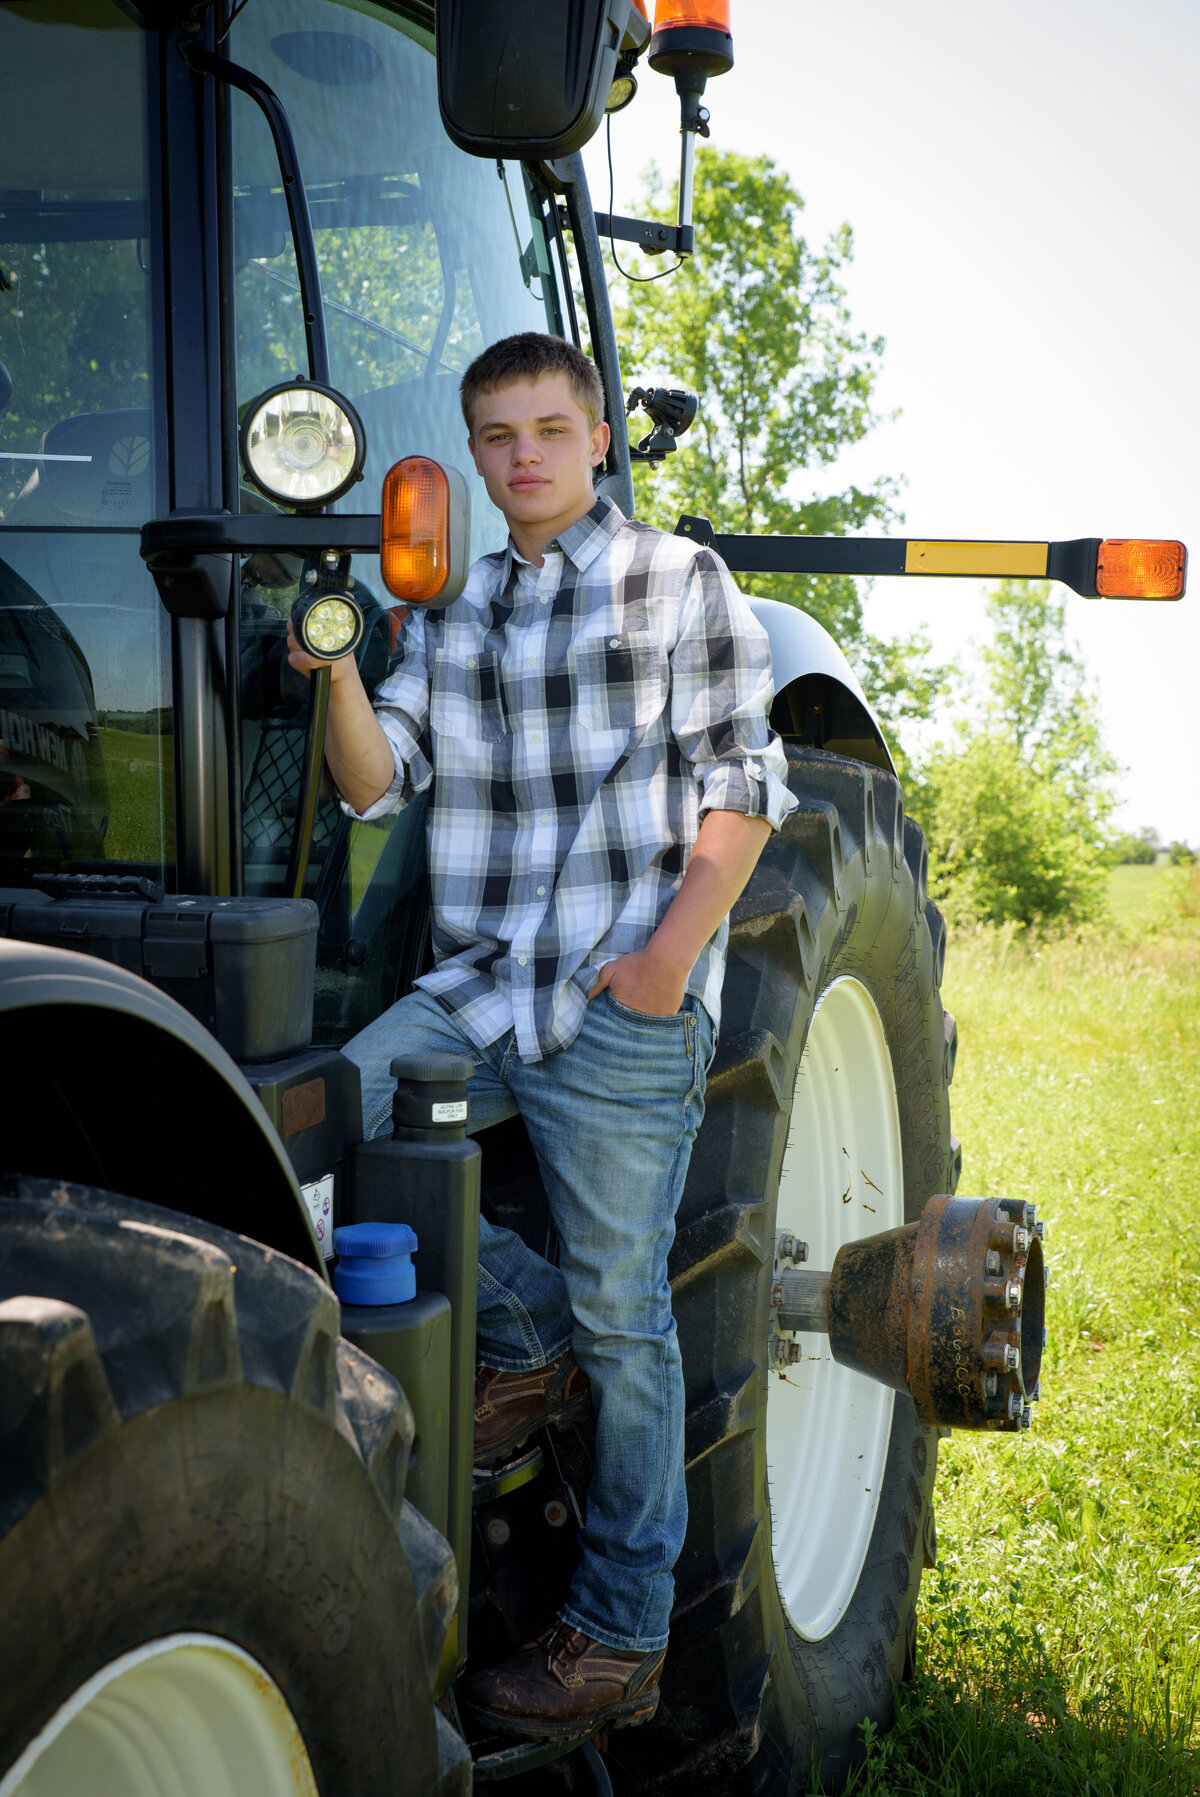 Luxemburg Casco high school senior boy wearing a black and white plaid button down shirt and jeans by a black New Holland tractor in farm field at his home near Green Bay, Wisconsin.